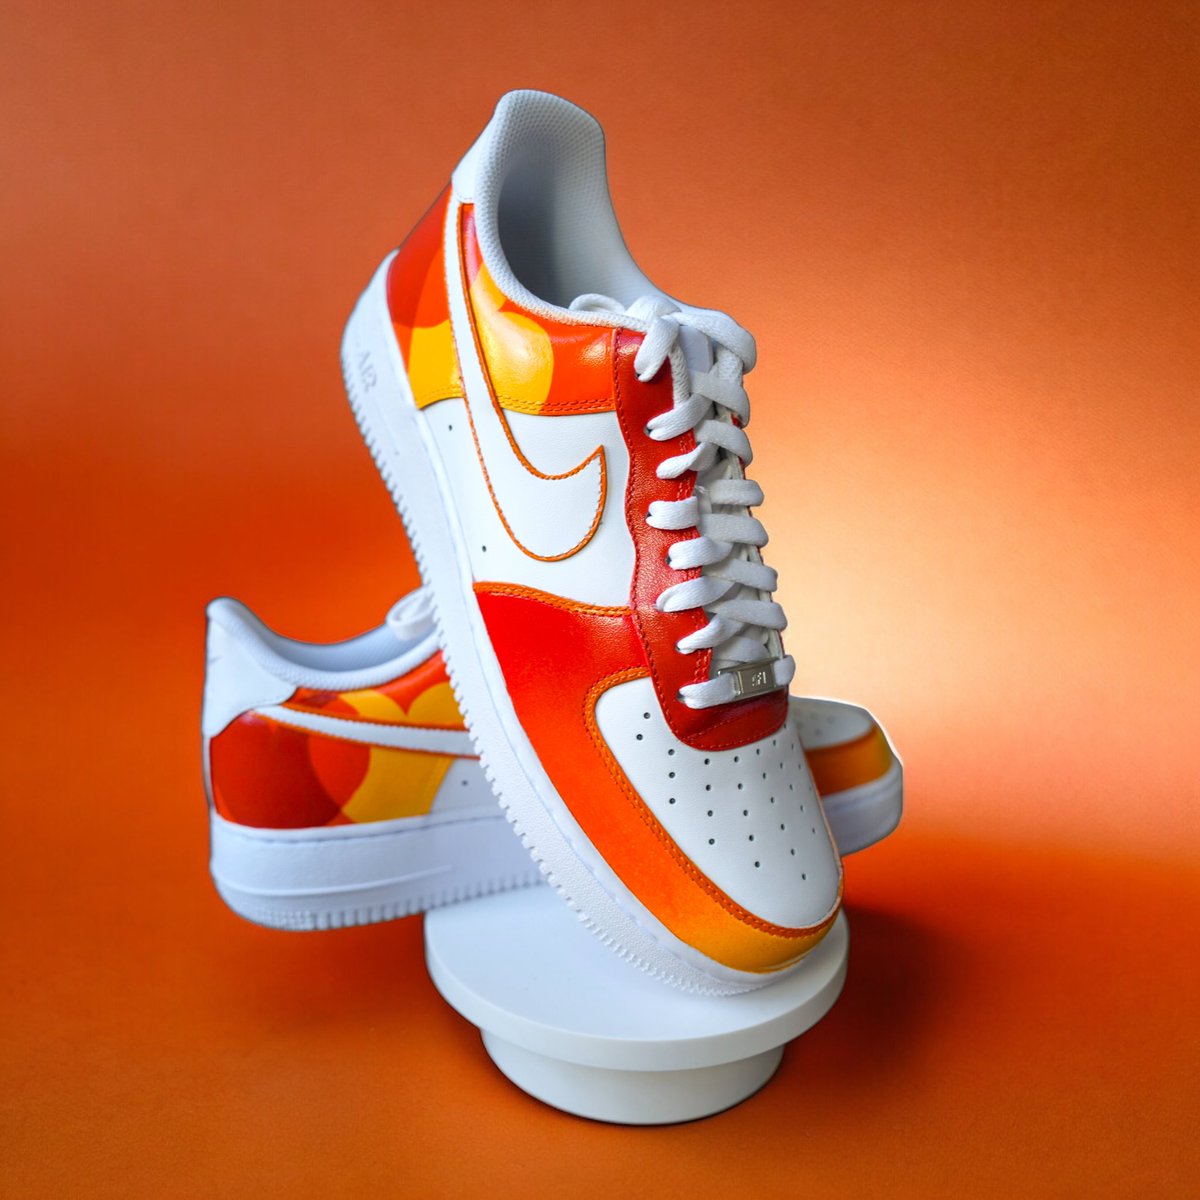 GM friends! 

Sending out the week with a bang!! Just finished these incredible @Mastercard themed custom sneakers for the most wonderful @bepositive! ❤️🧡